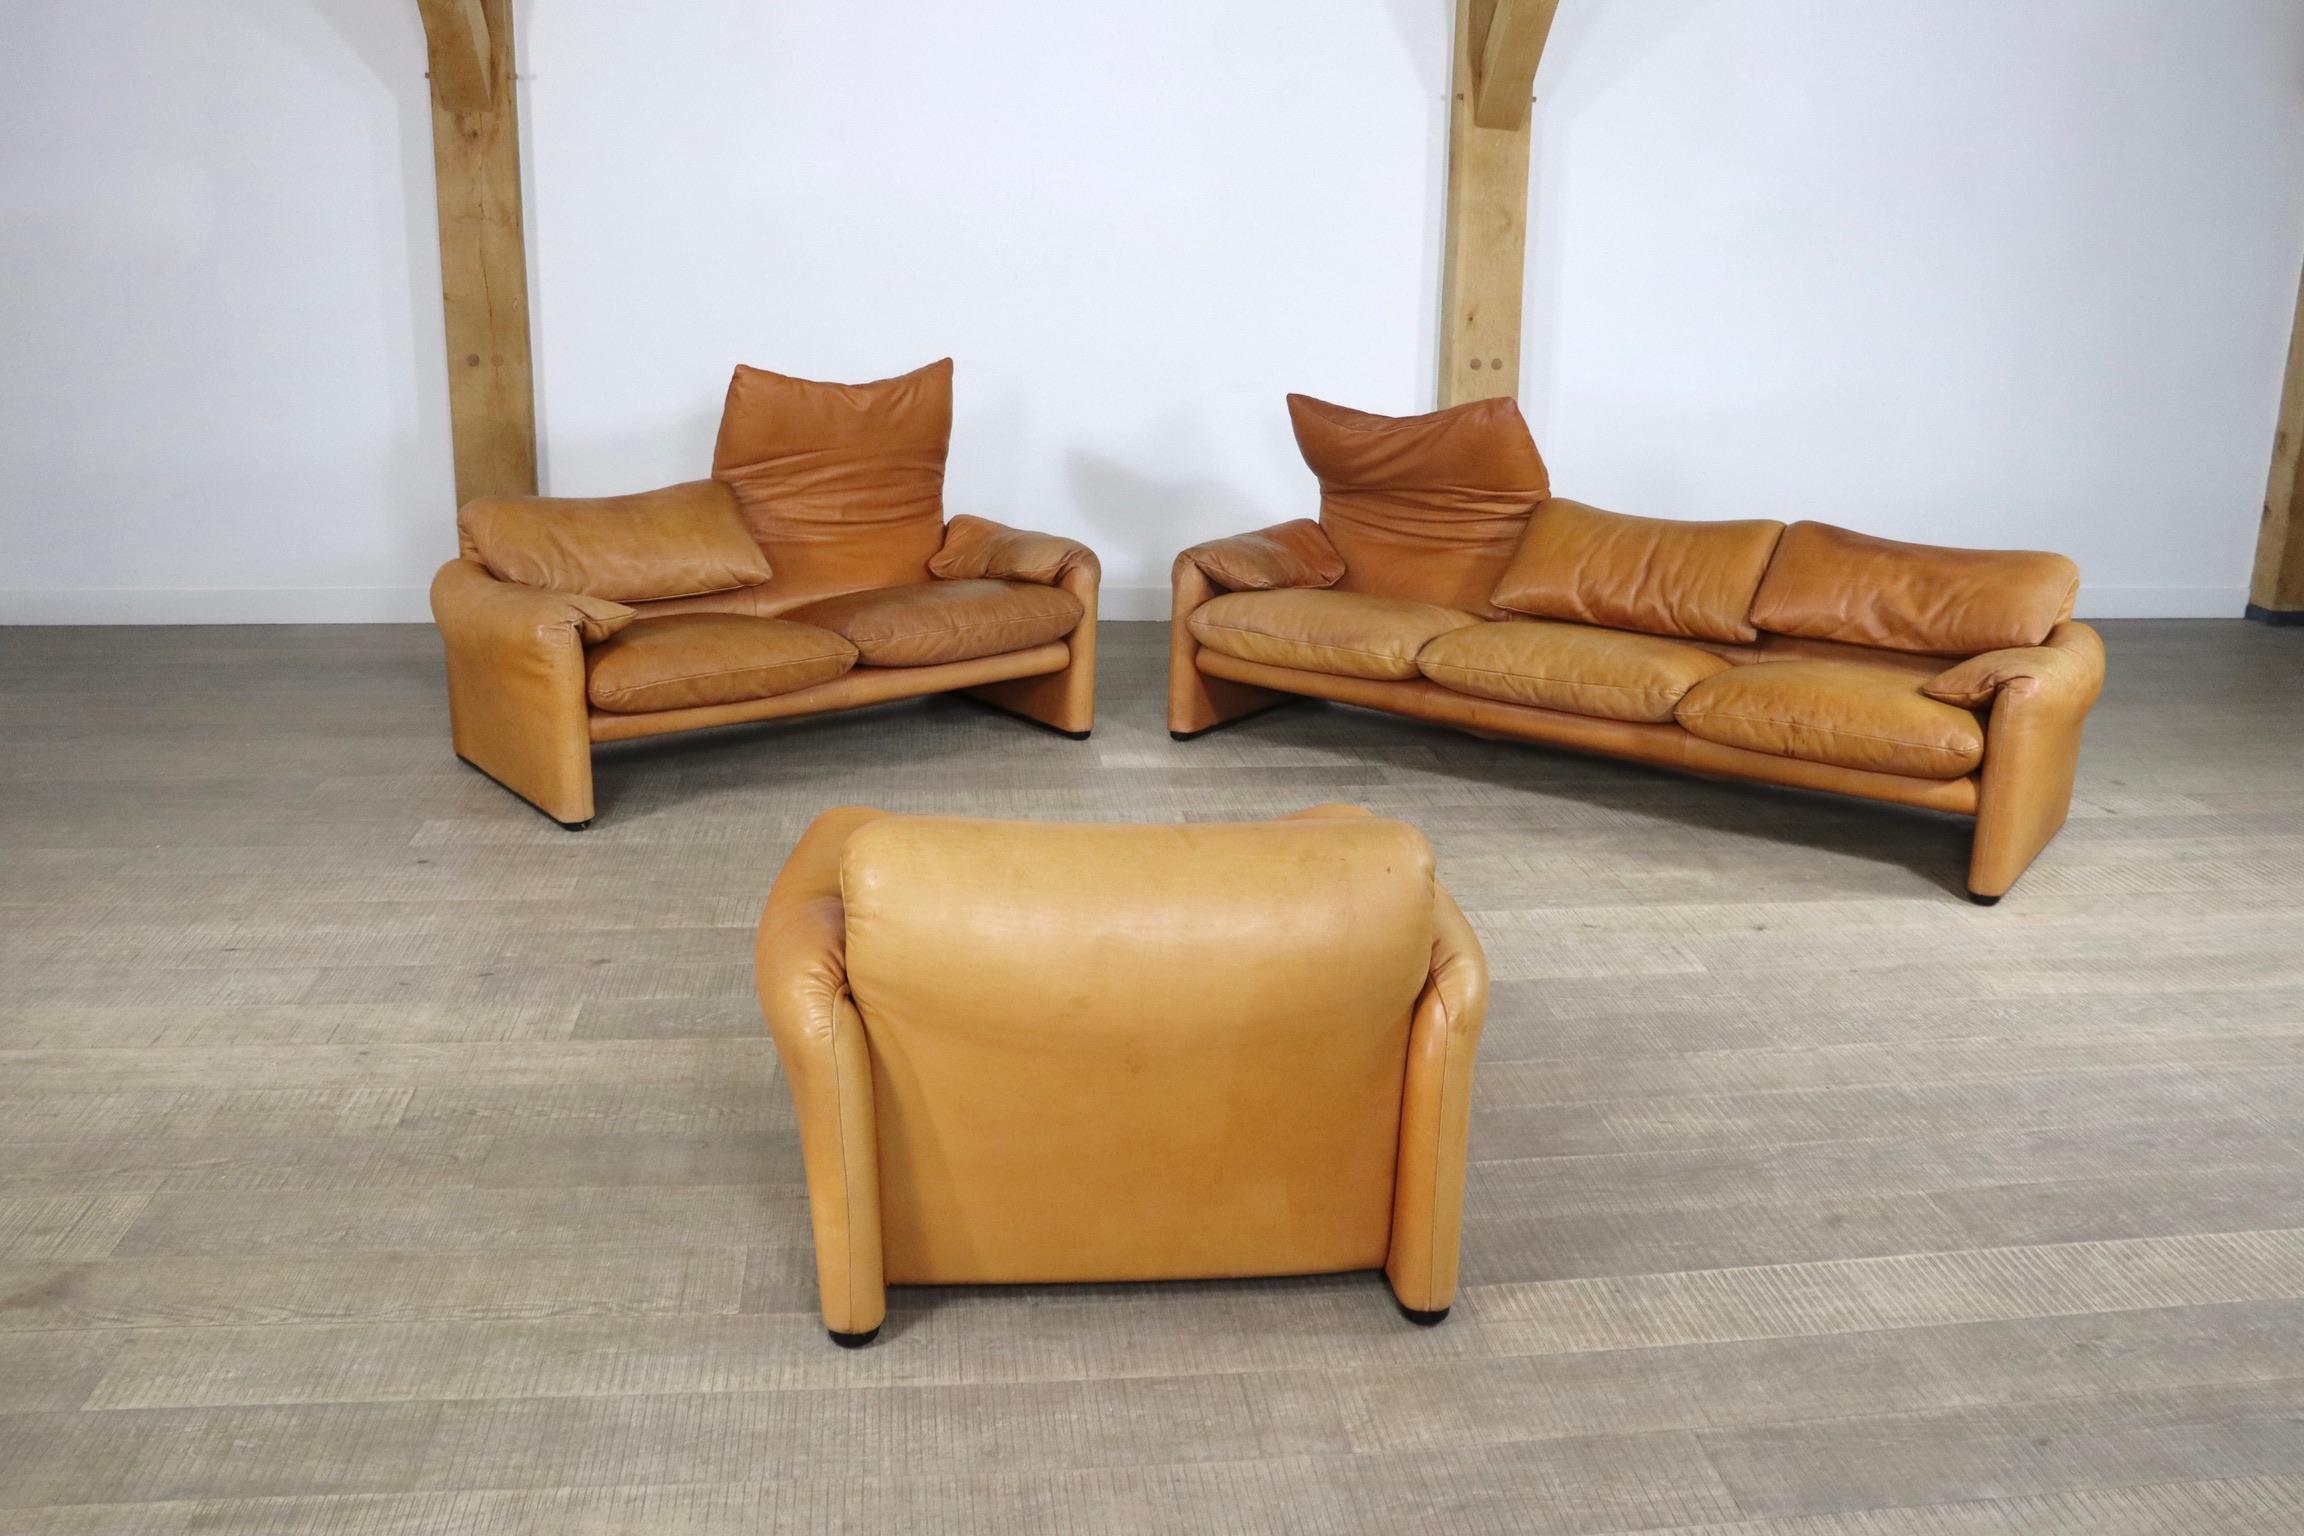 Late 20th Century Maralunga Set in Cognac Leather by Vico Magistretti for Cassina, 1970s